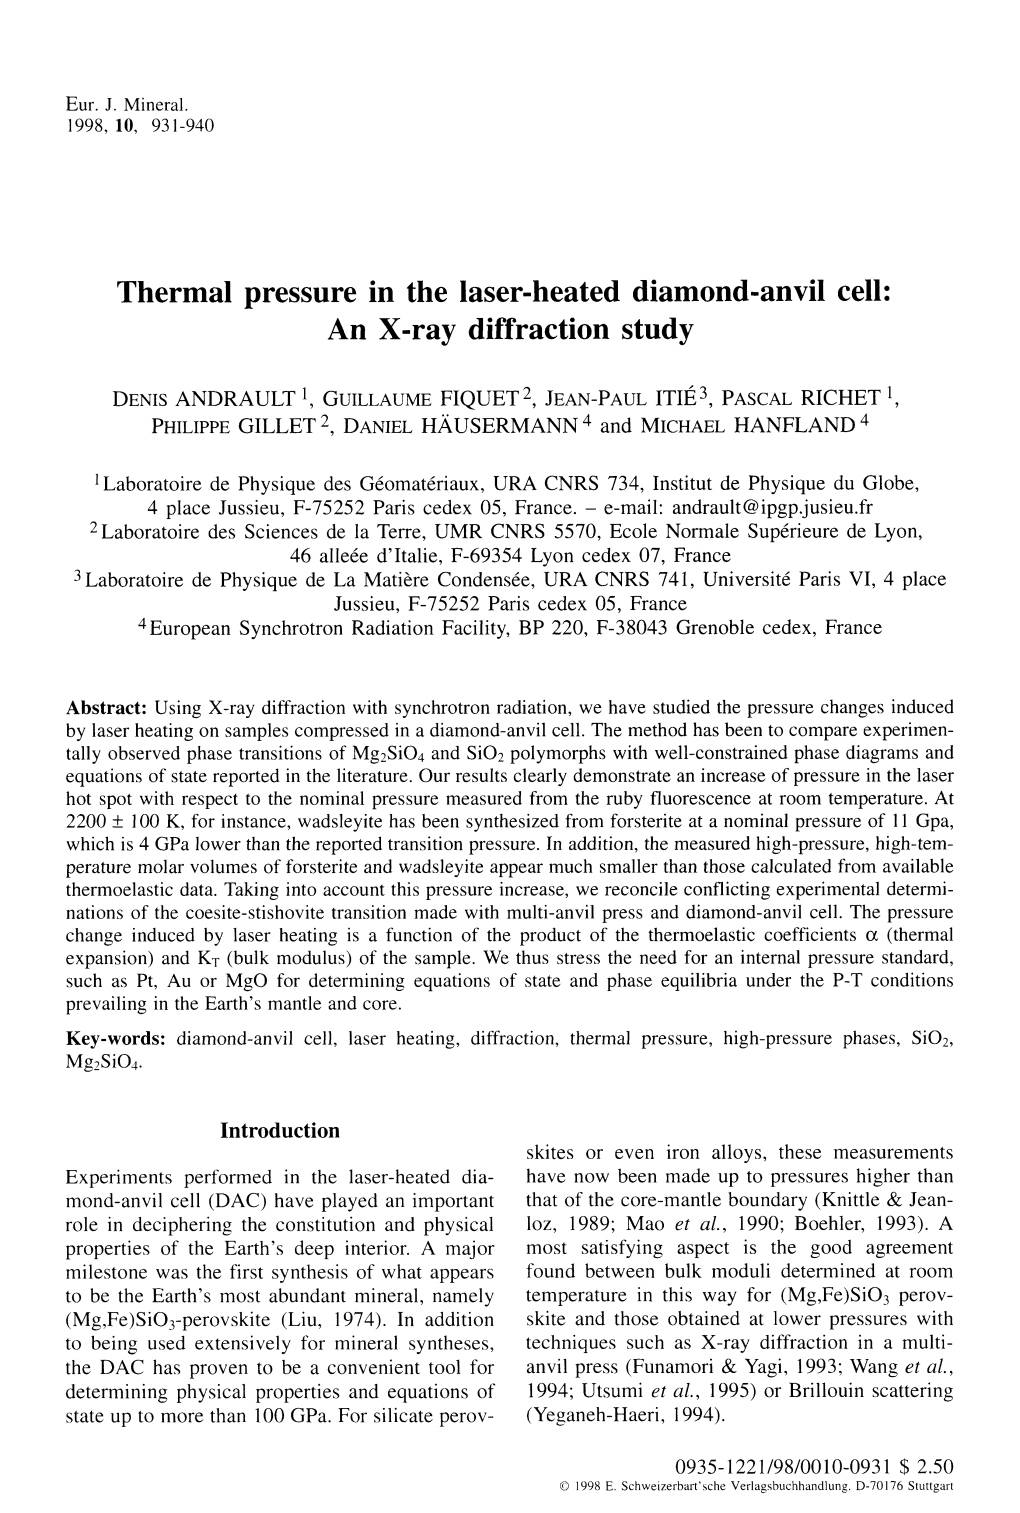 Thermal Pressure in the Laser-Heated Diamond-Anvil Cell: an X-Ray Diffraction Study